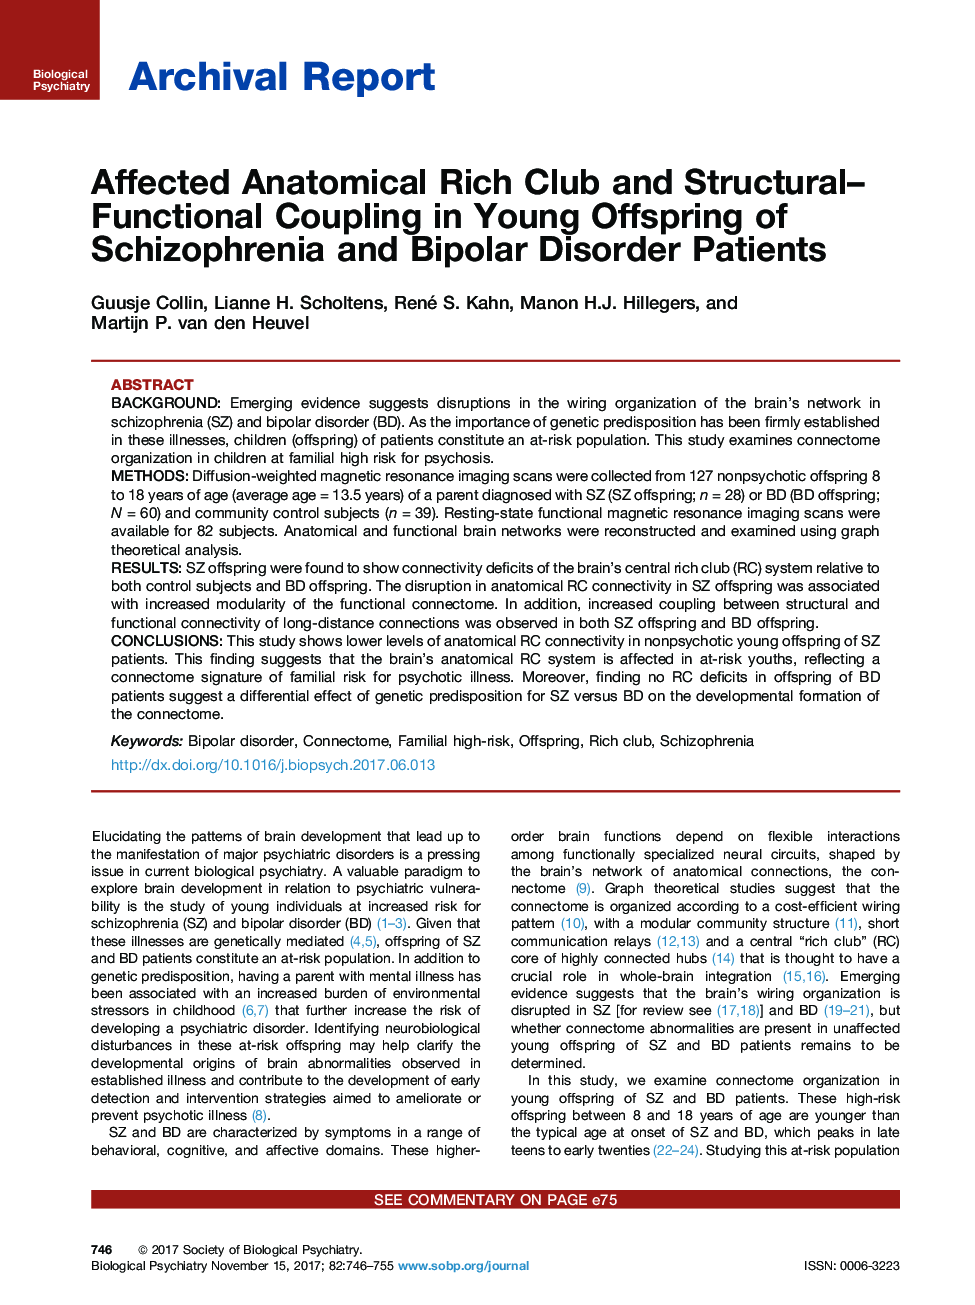 Archival ReportAffected Anatomical Rich Club and Structural-Functional Coupling in Young Offspring of Schizophrenia and Bipolar Disorder Patients